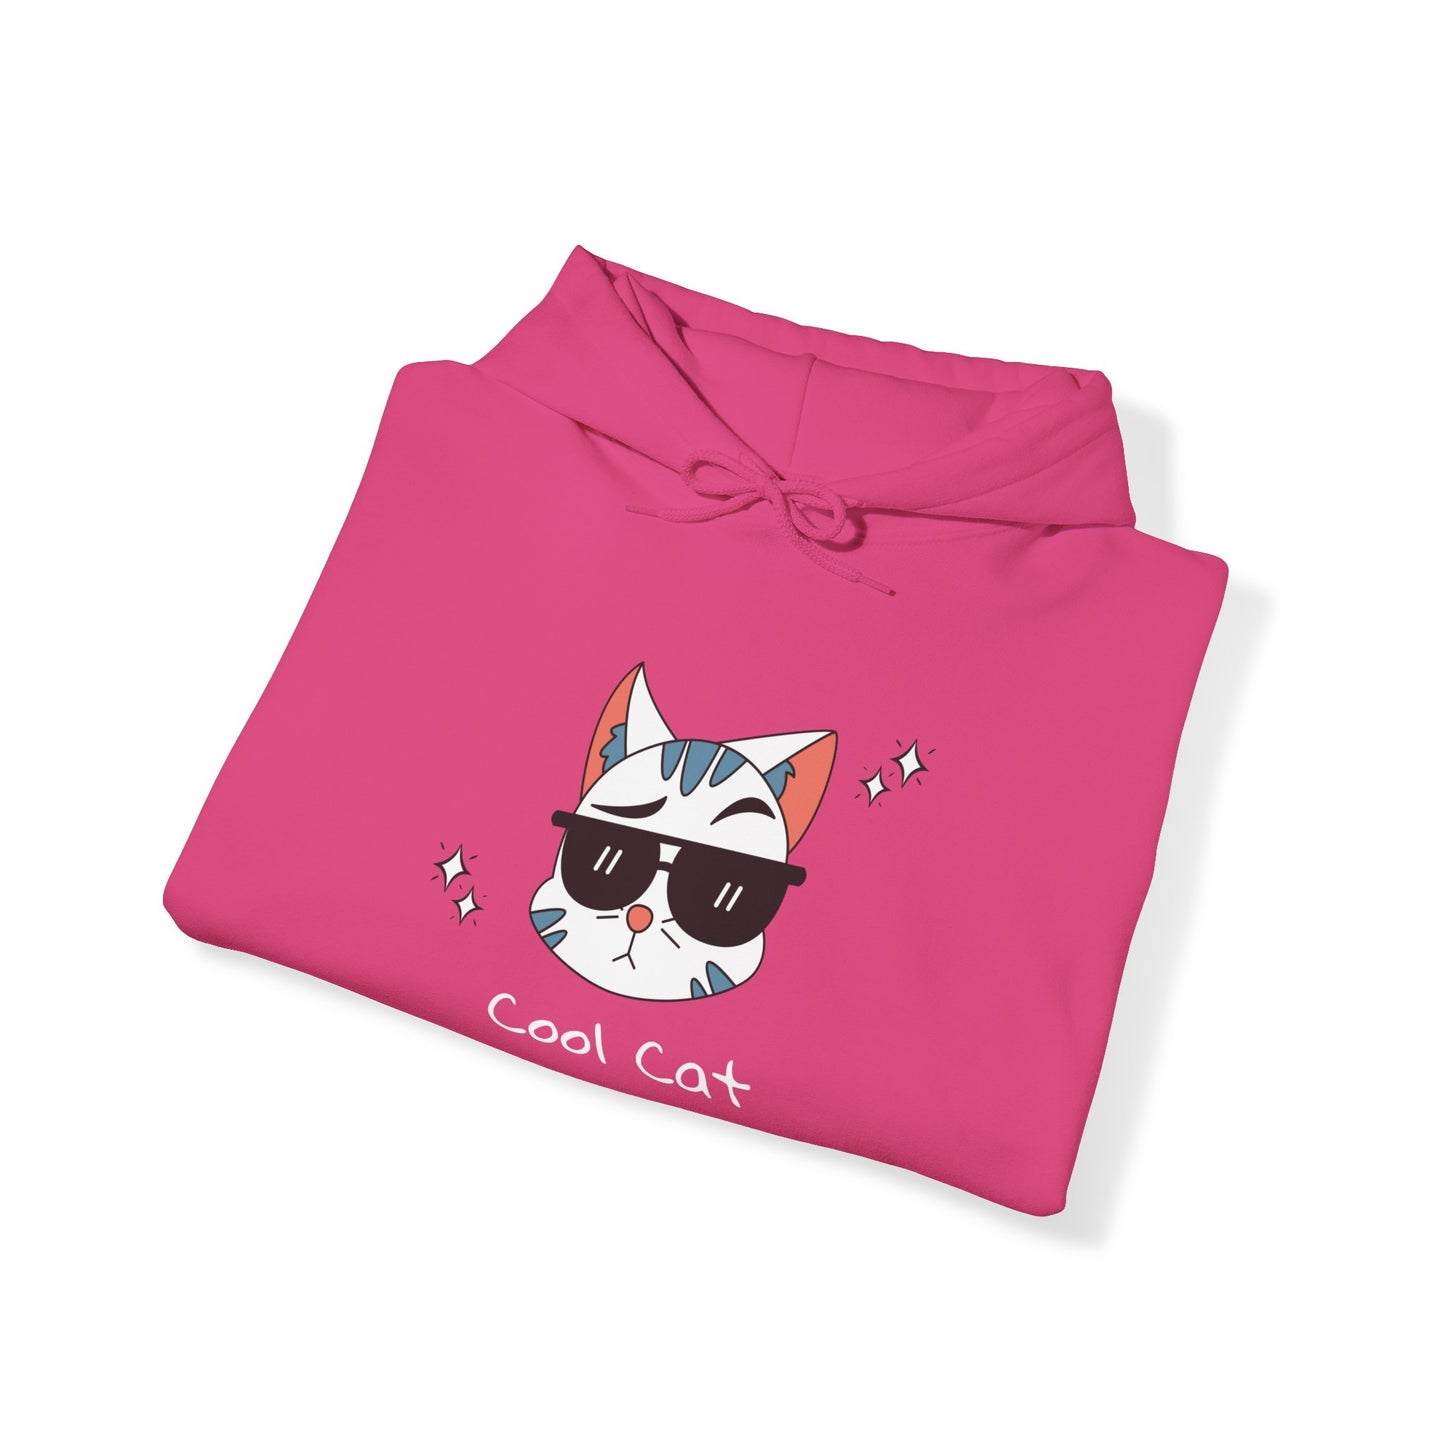 Coco The Coolest Cat I Know. Unisex Hooded Sweatshirt.